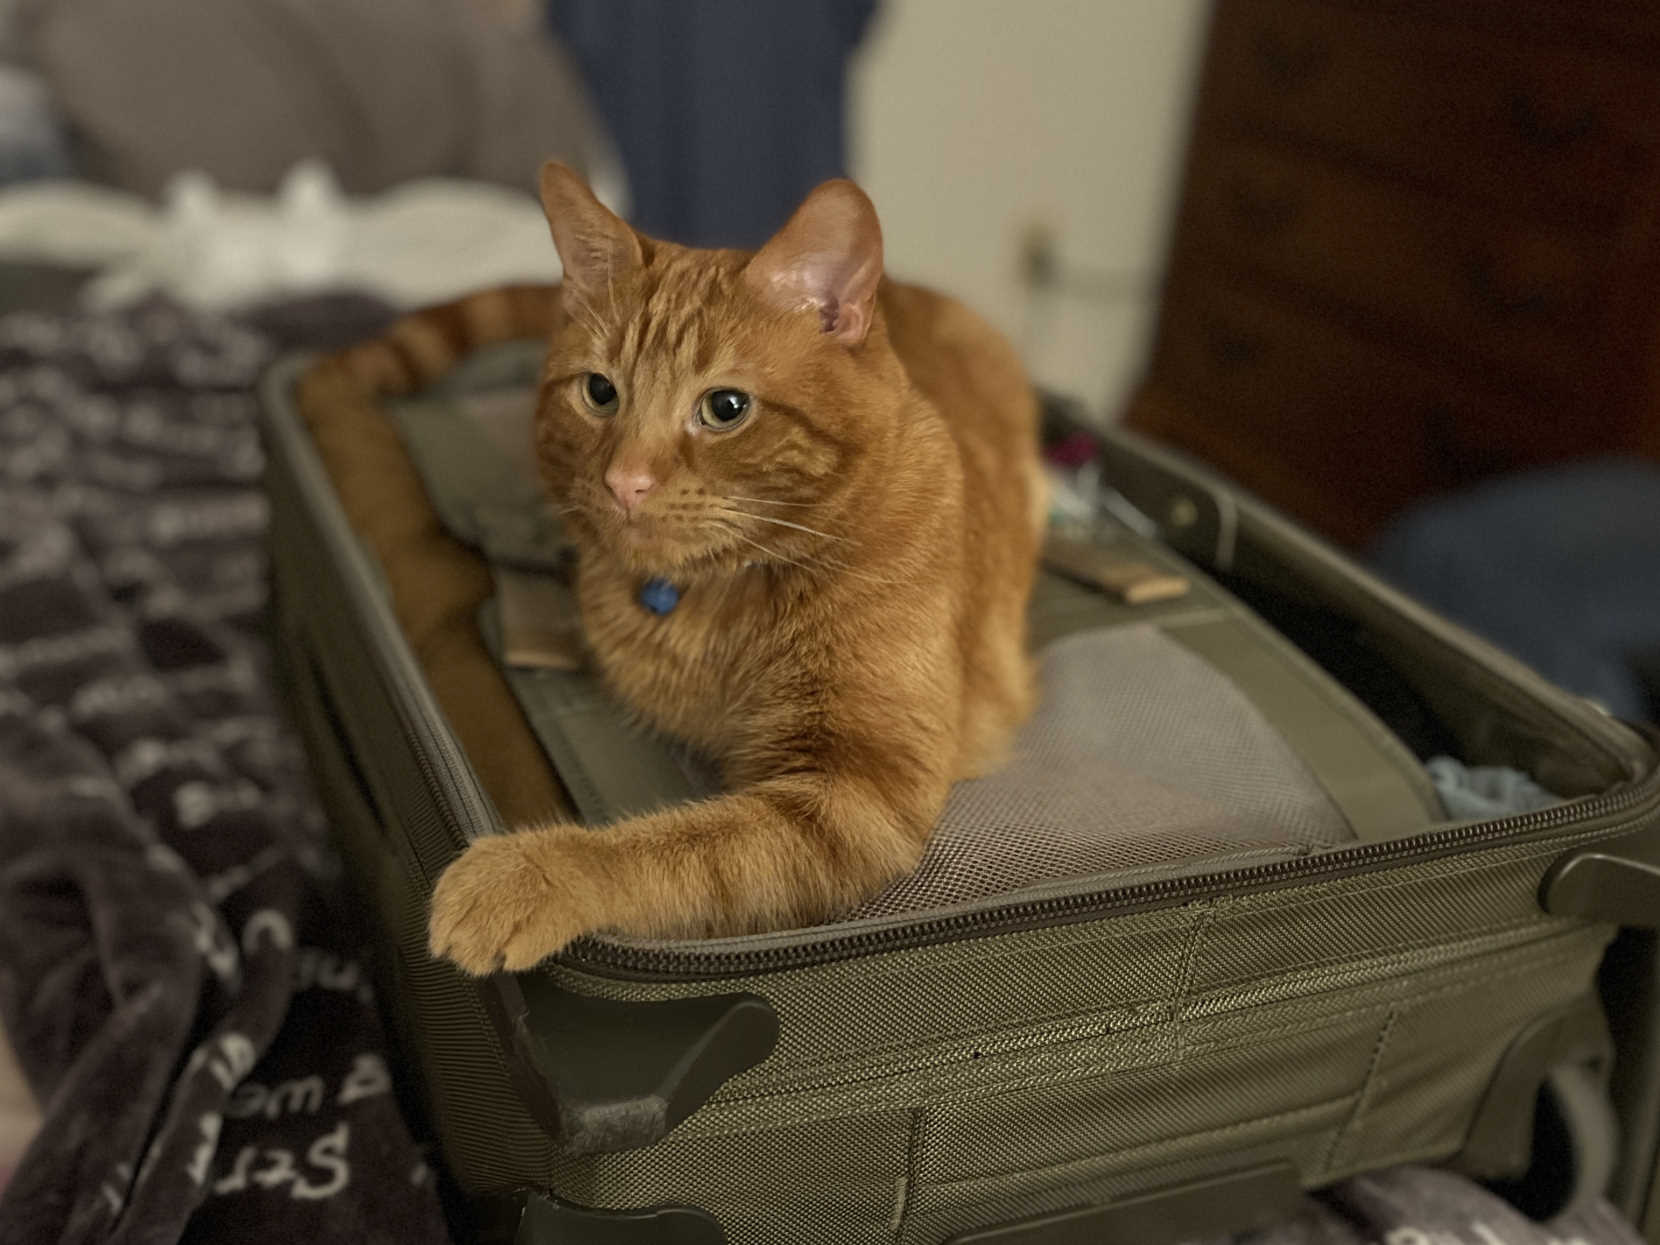 An orange cat sitting on a suitcase